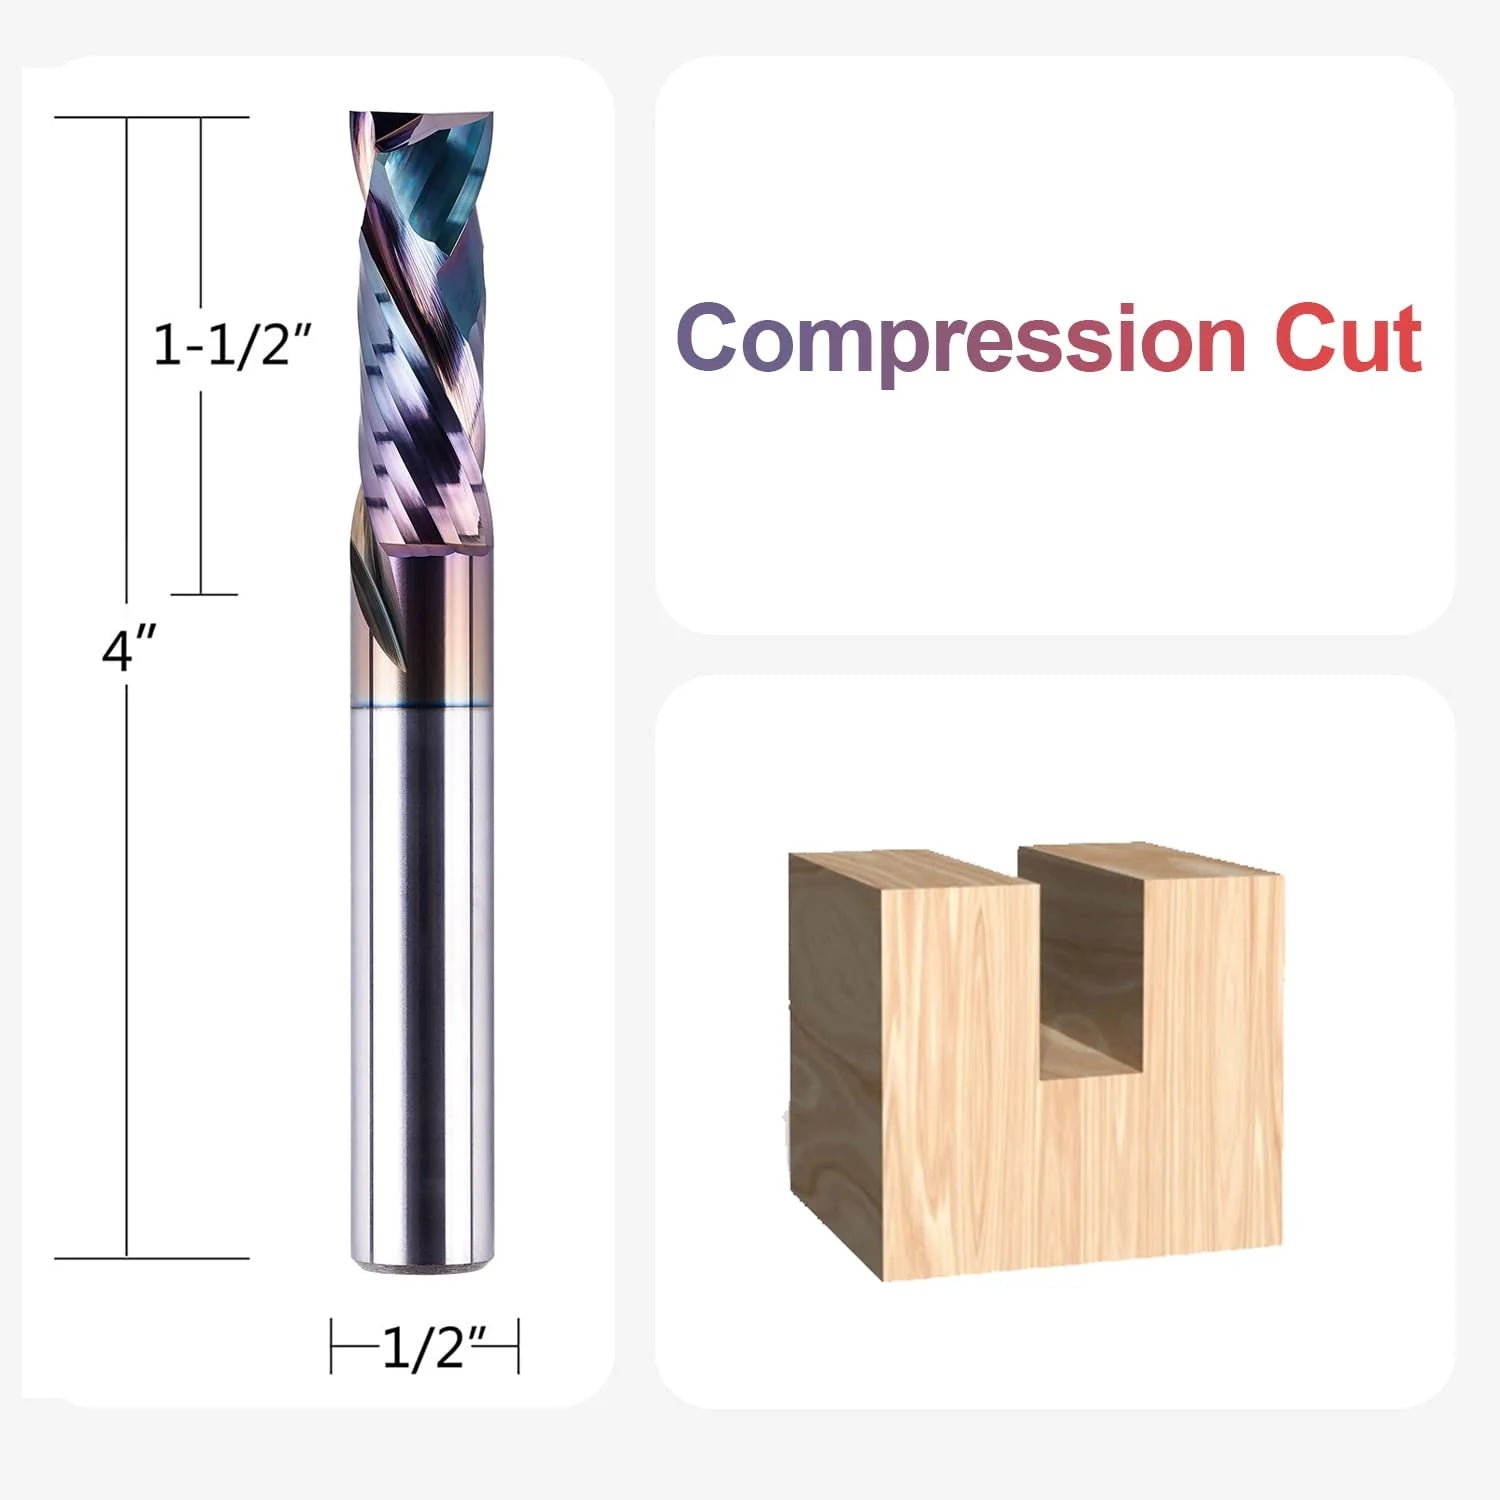 SpeTool CA W02006 SPE-X Ultra Tool Life Coated SC Compression Spiral 1/2" Dia x 1/2" Shank x 1-1/2" Cutting Length x 4" Extra Long 2 Flute Router Bit